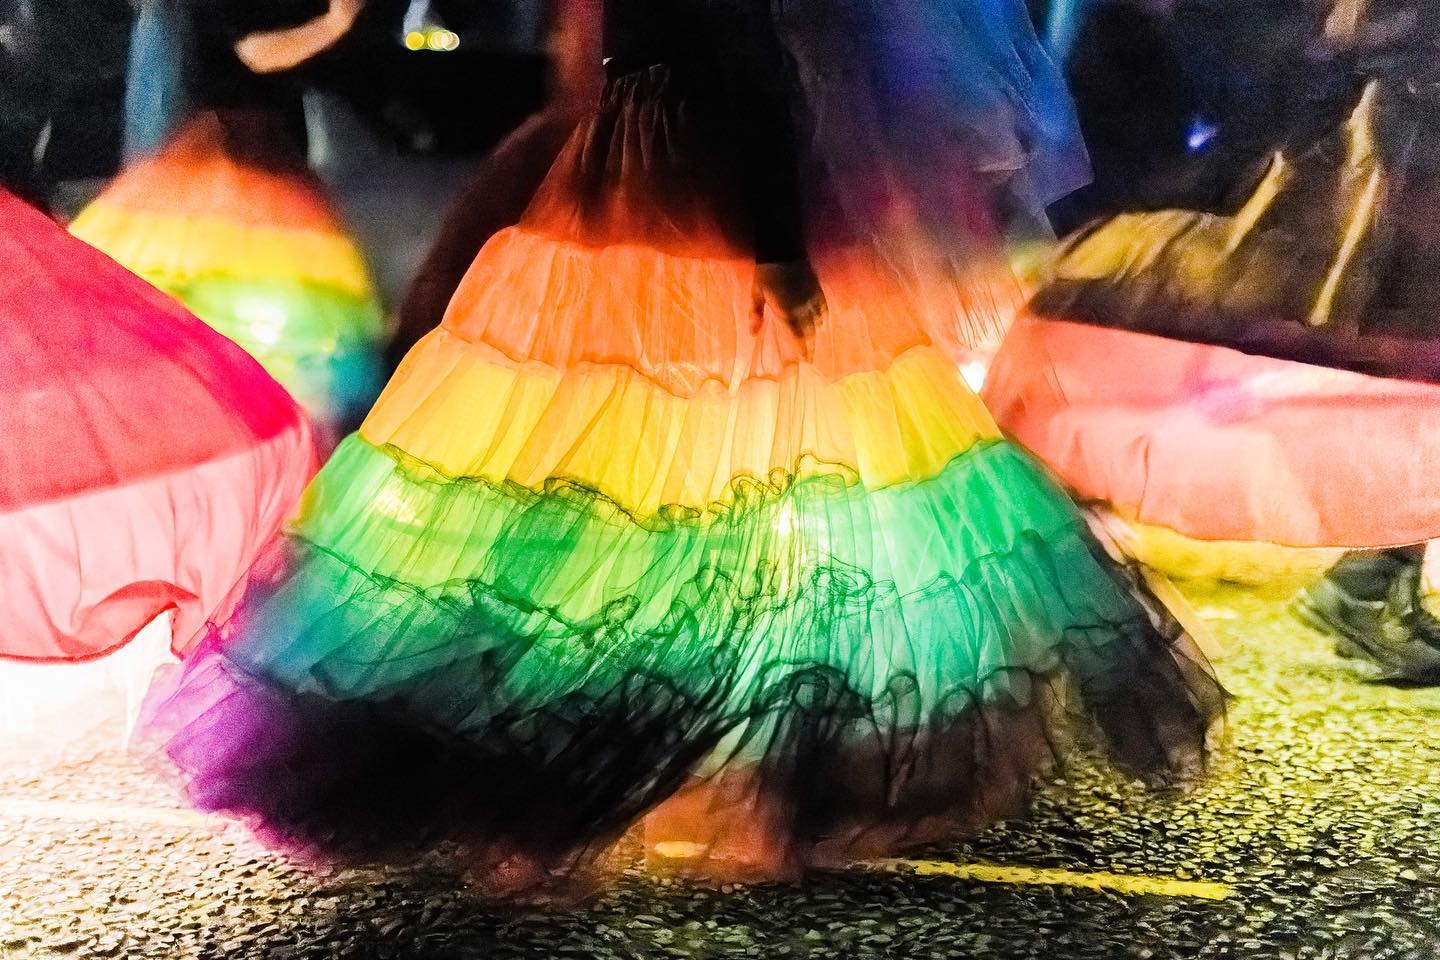 The Rainbow Section: combining elements, bringing joy and hope 🌈

Image ft a rainbow dancer in a new illuminated rainbow skirt in the rainbow section for The Spirit Of The North

📸 Sam Orchard @sgorchard 

#SpiritOfTheNorth #Cabasa #RainbowSkirt #silk #carnival #crinoline #RainbowDress